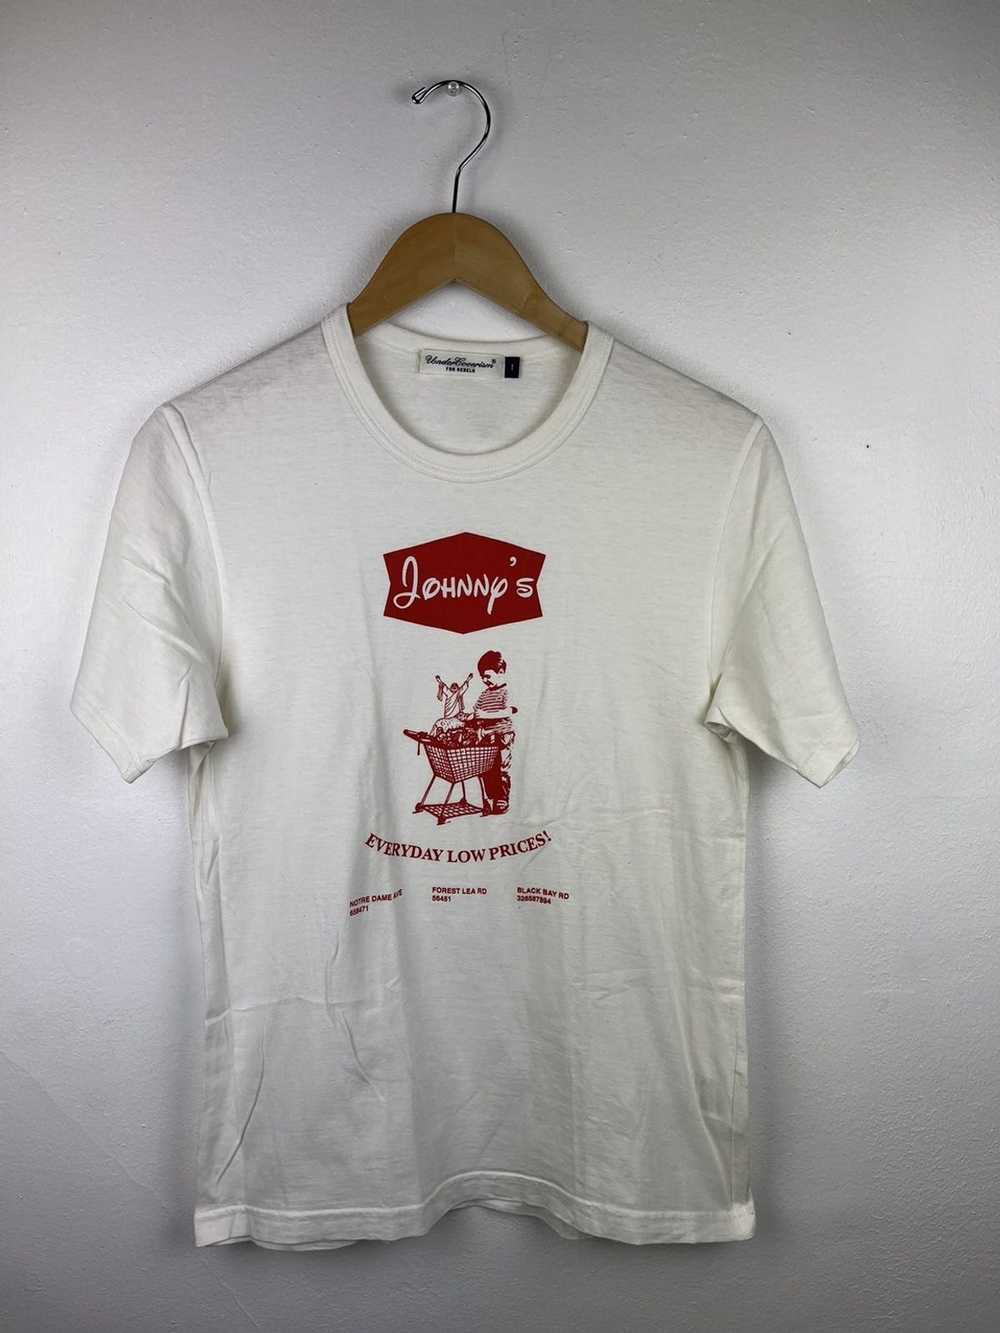 Undercover Undercover Tee - image 1